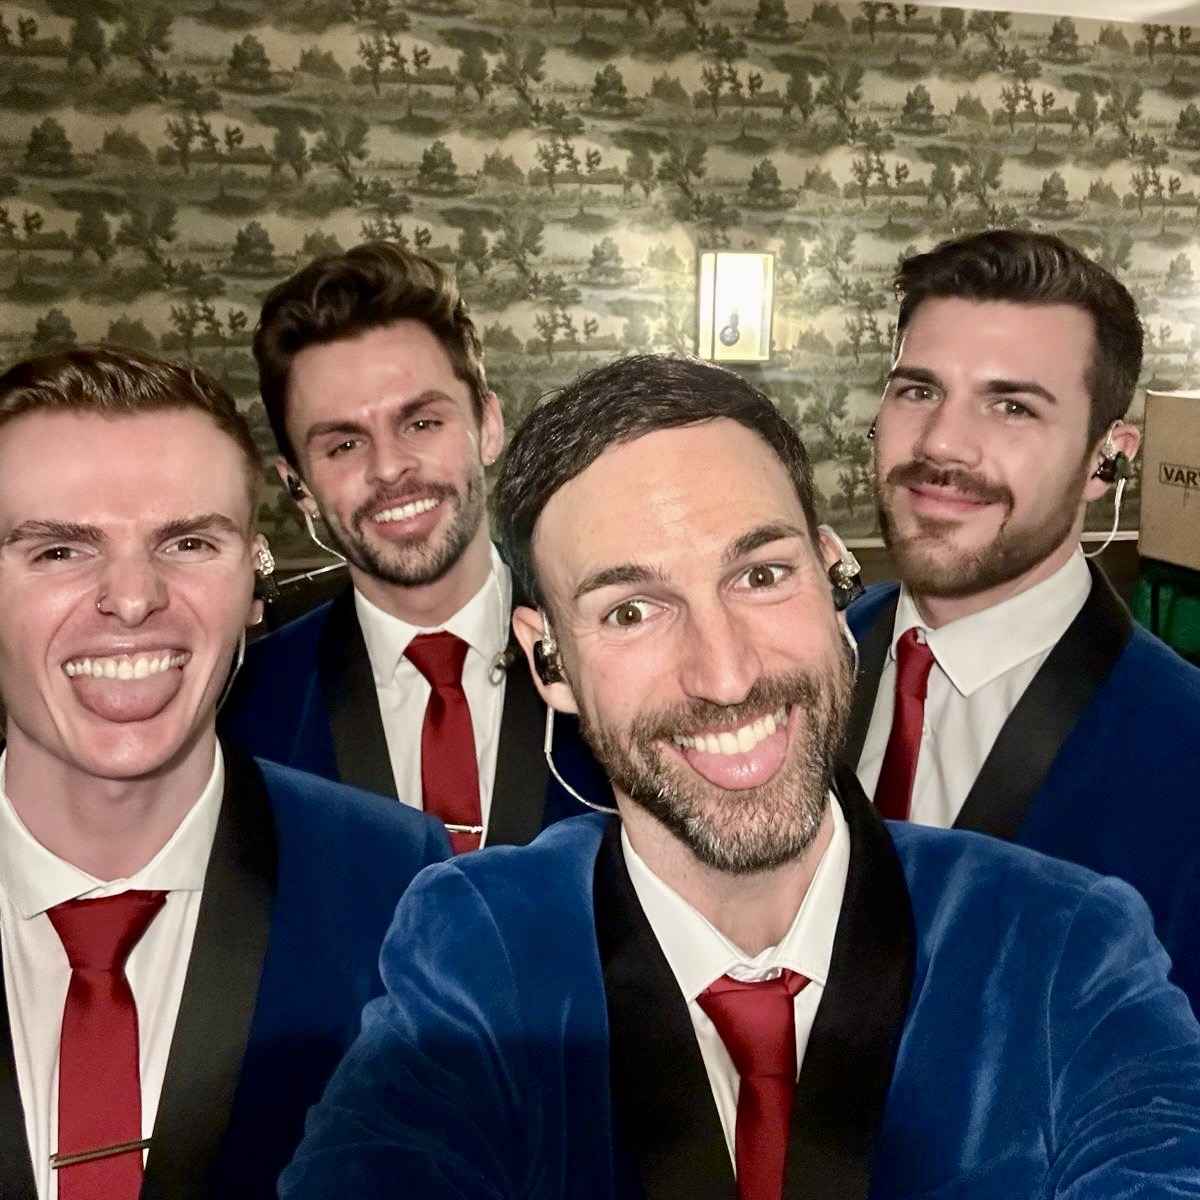 😃We’ve got 2 SHOWS THIS WEEK!! 

We’ve got double the Frankie’s Guys fun headed your way with shows in Bury St Edmunds and Wimborne this week - We can't wait to see you WALK LIKE A MAN! ⁠

🎟️Frankiesguys.com

#fourseasonstribute #frankievallitribute #jerseyboys